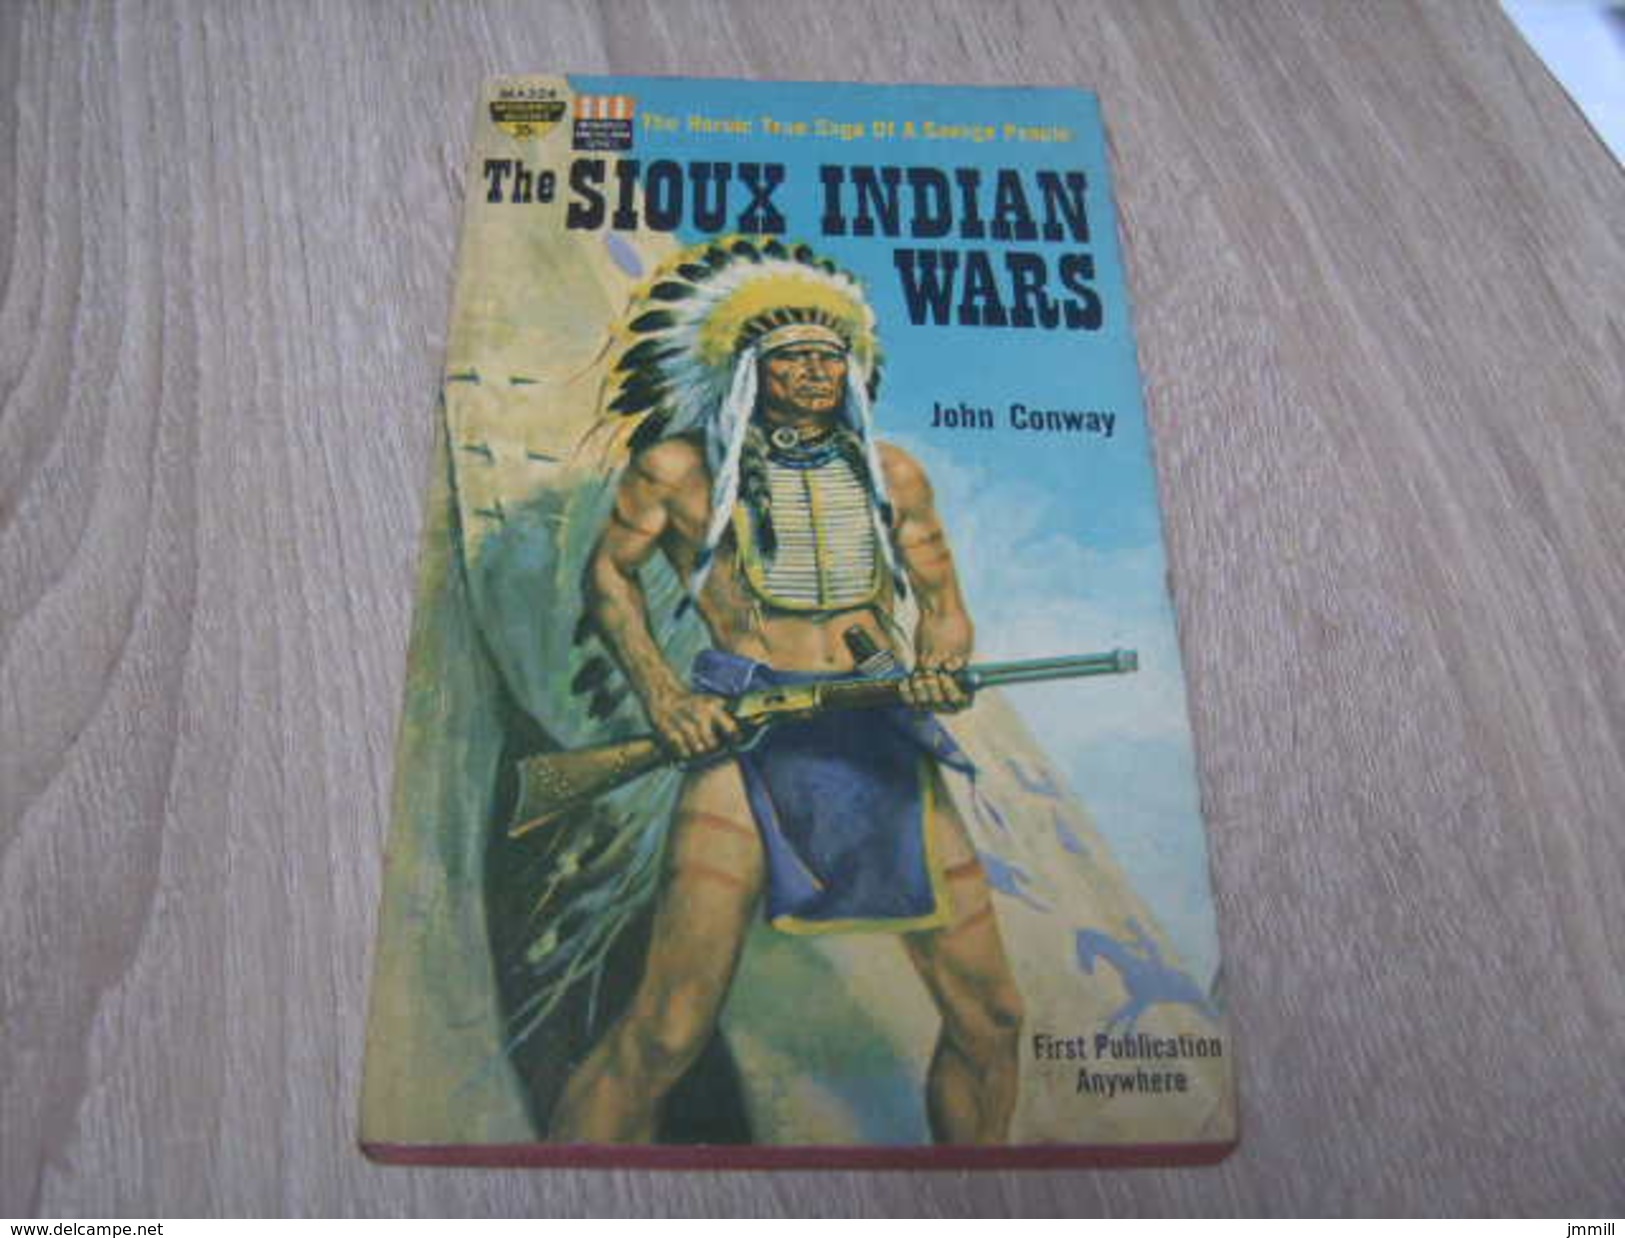 The Sioux Indian Wars John Conway - 1850-1899